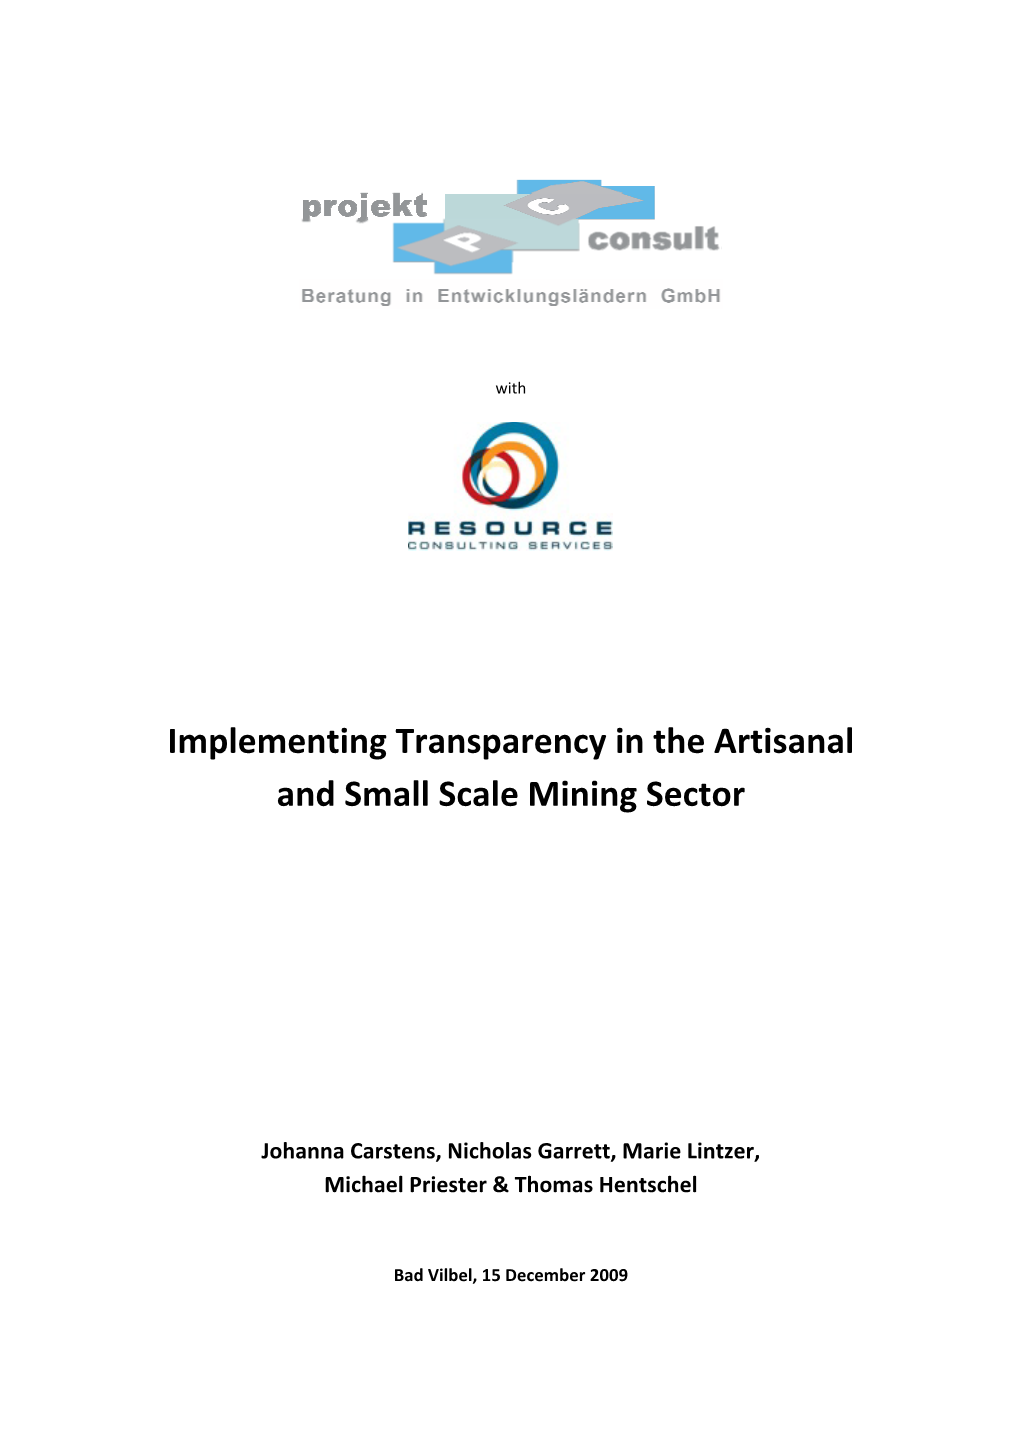 Implementing Transparency in the Artisanal and Small Scale Mining Sector